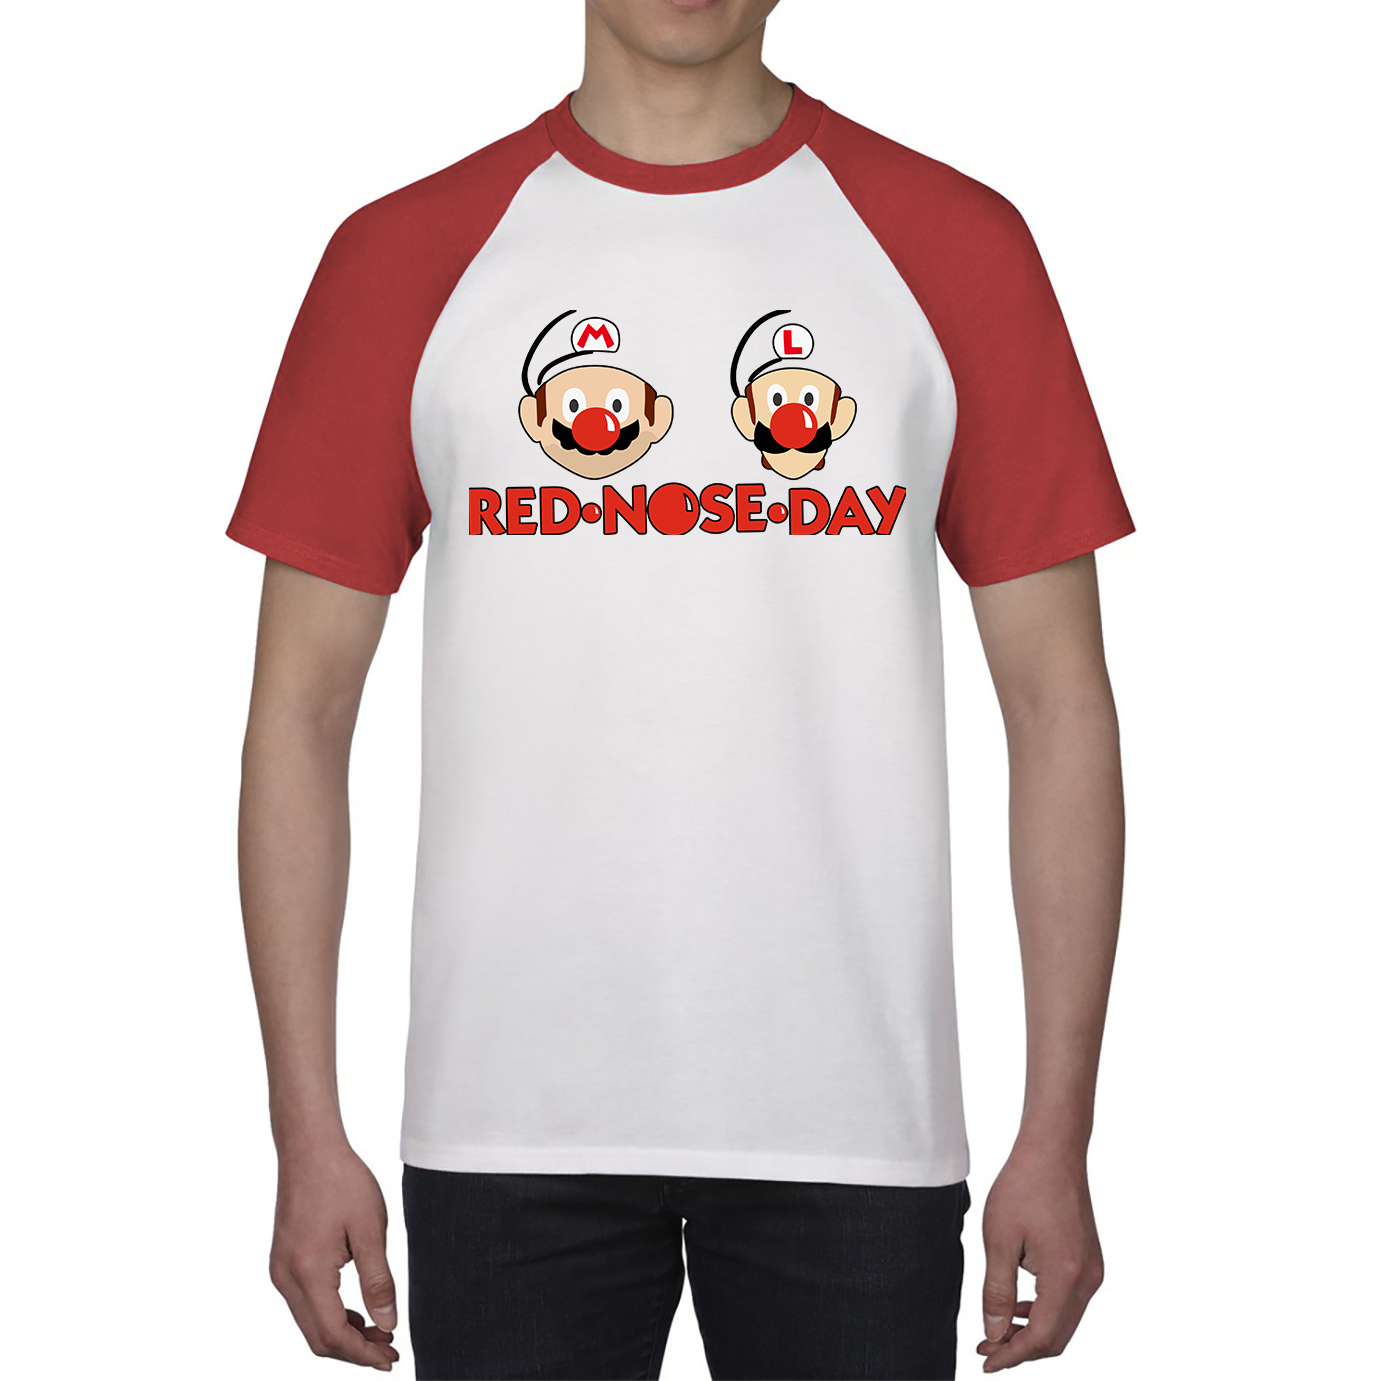 Super Mario Bros Red Nose Day Baseball T Shirt. 50% Goes To Charity